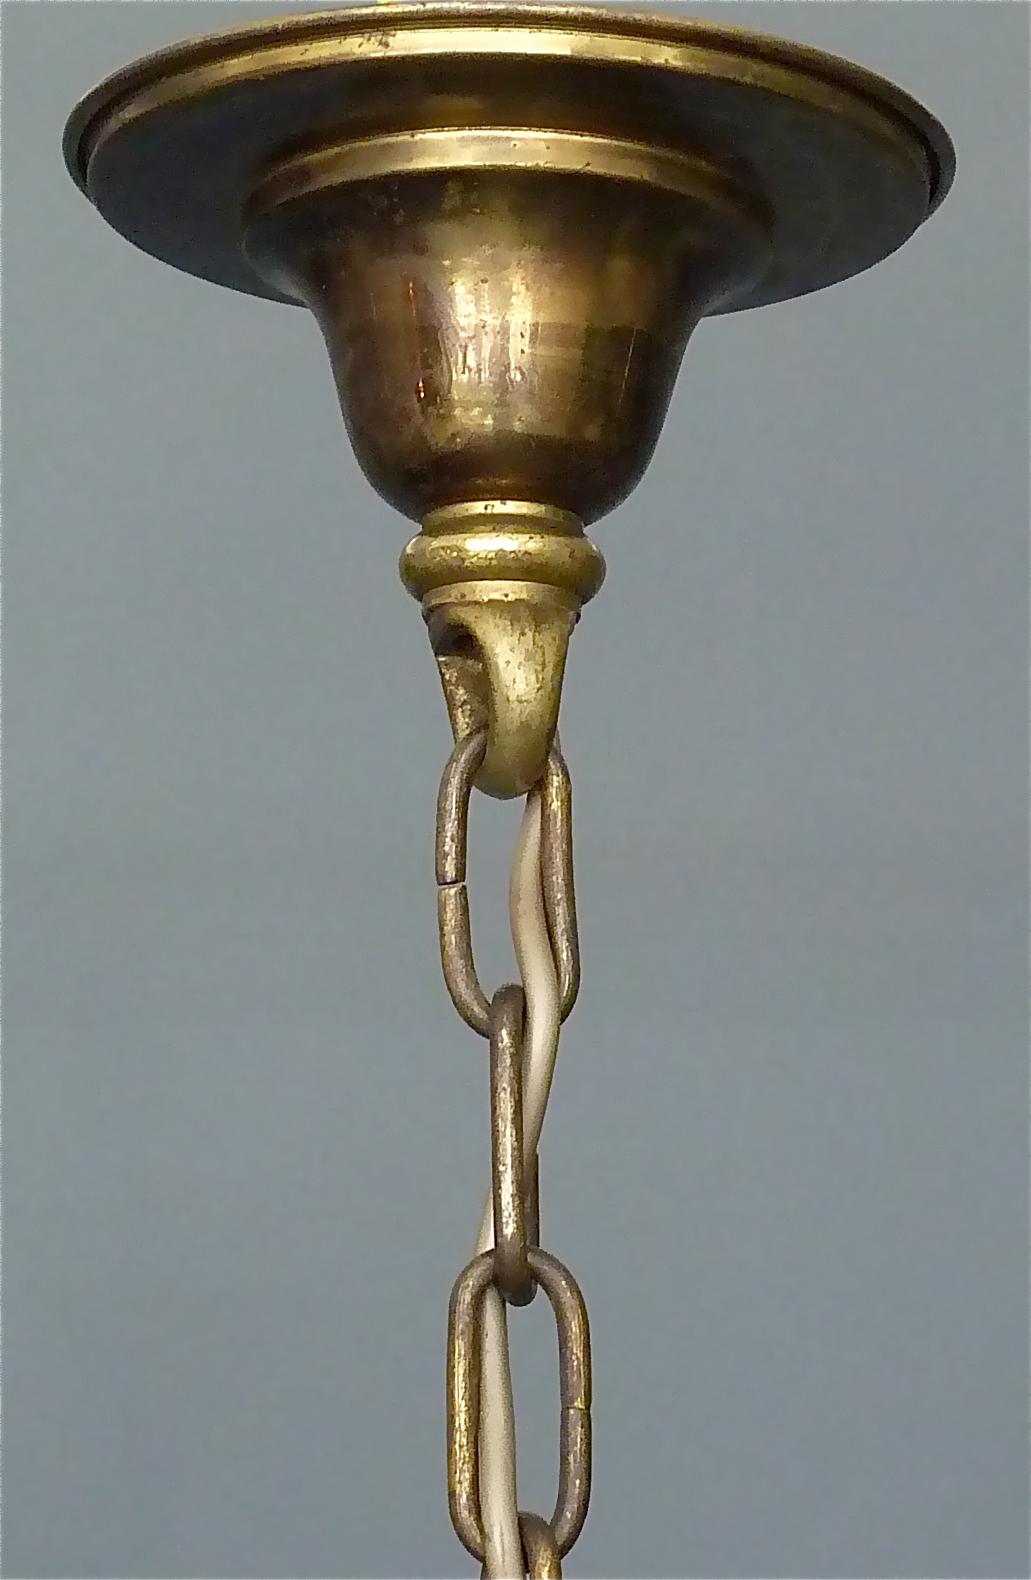 Late 19th Century Large Antique French Lantern Lamp Faceted Crystal Glass Bronze Brass 1880 - 1900 For Sale